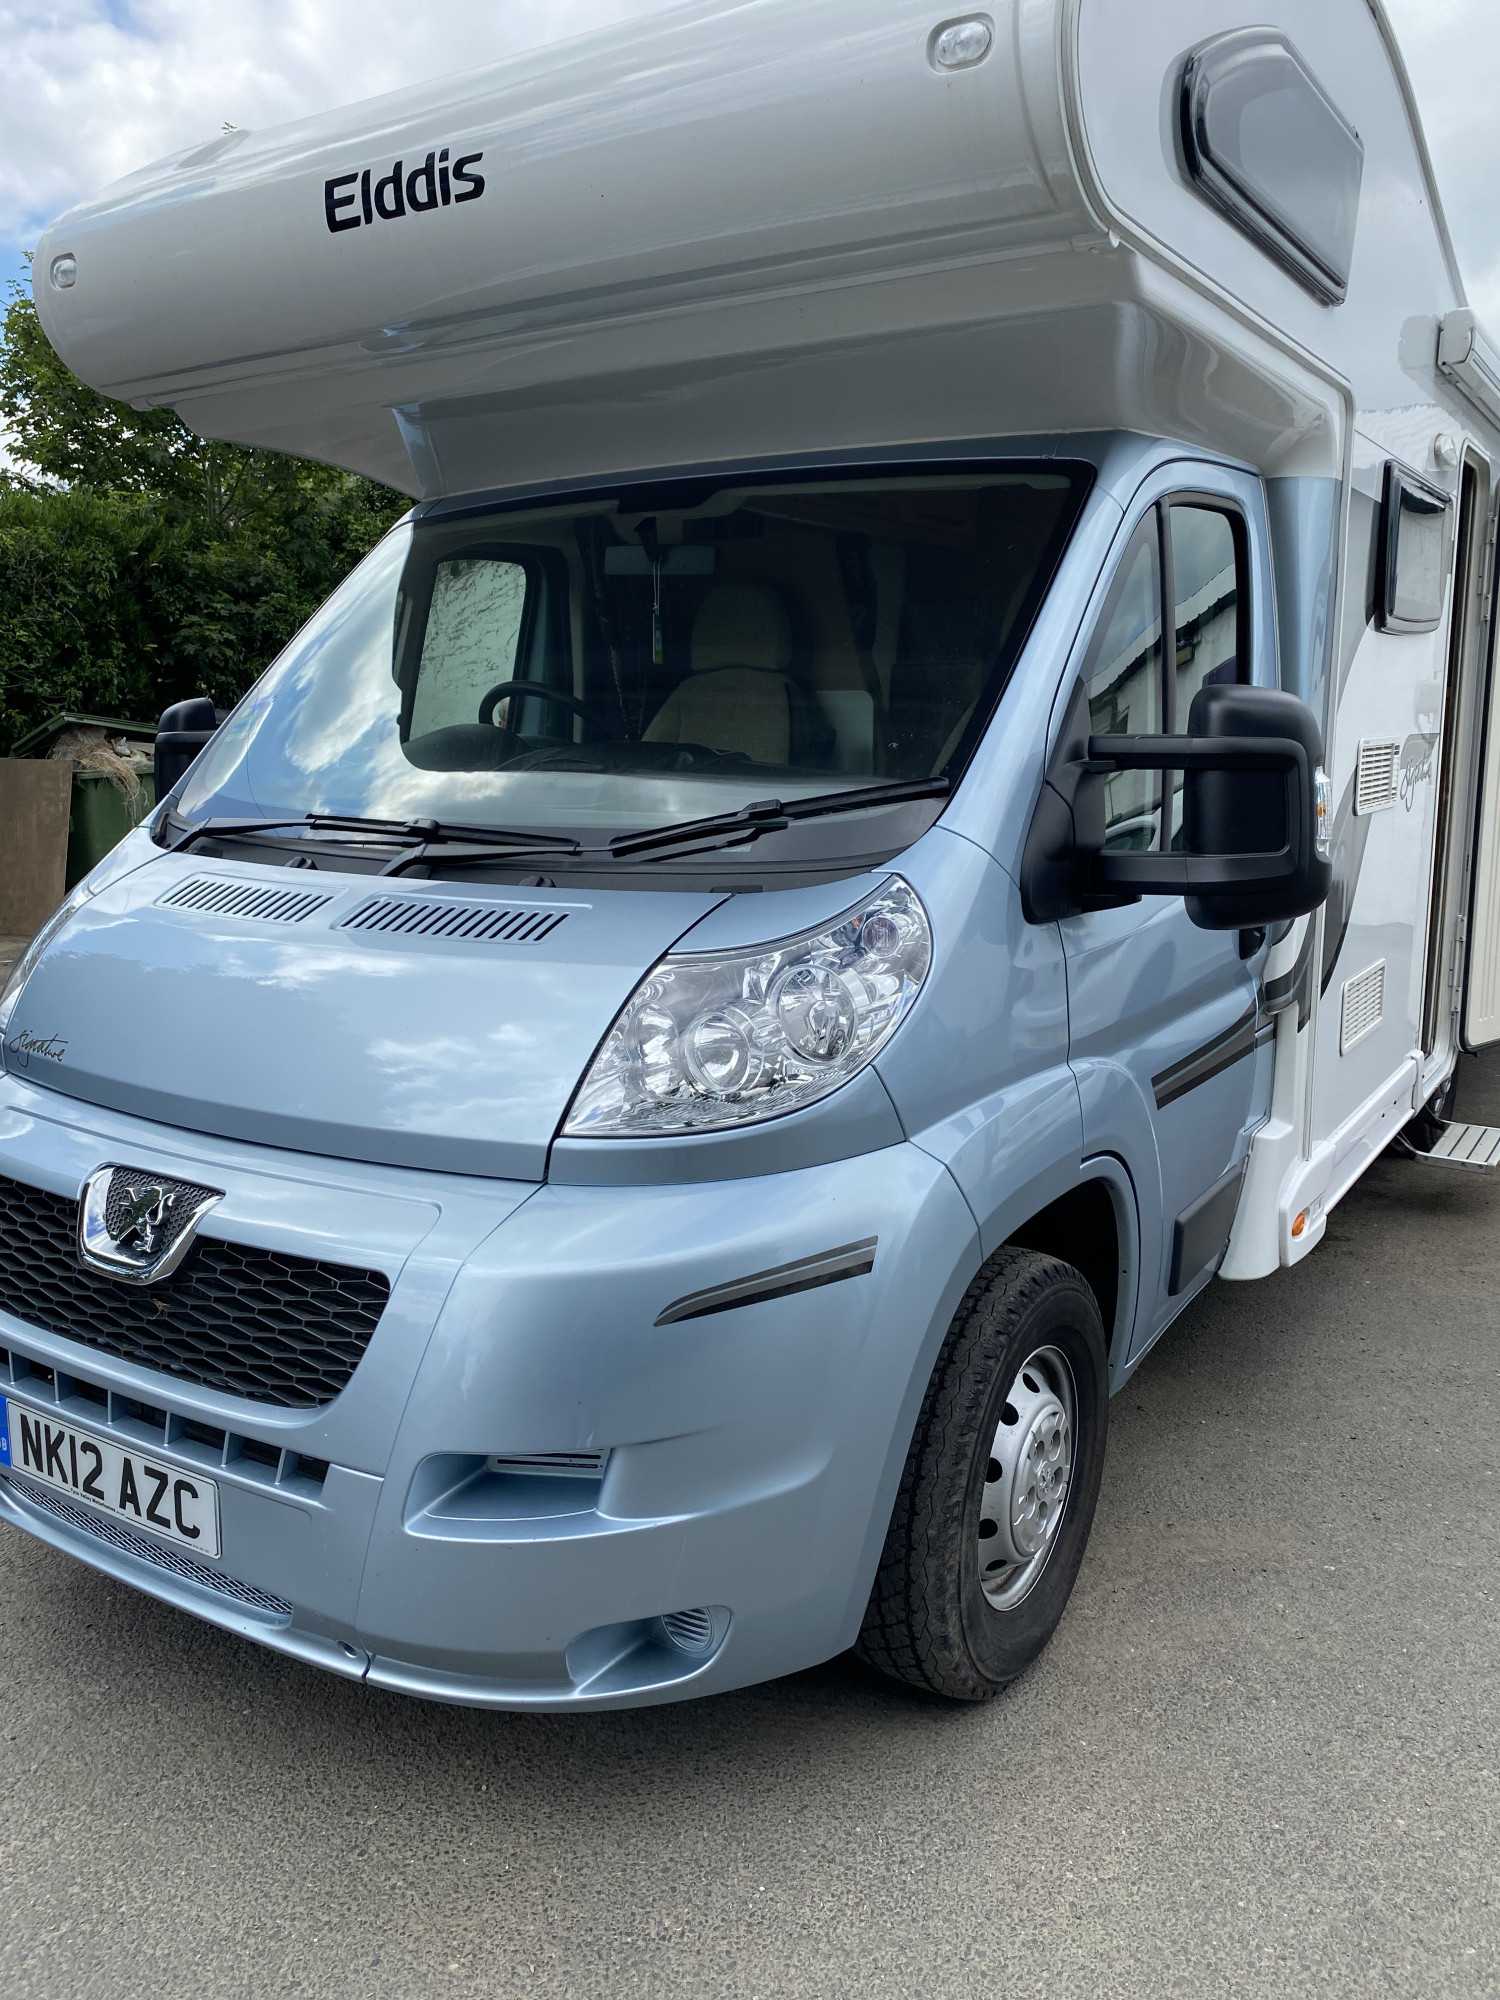 A  Motorhome called Bella and Front for hire in Newcastle upon tyne, Tyne and Wear